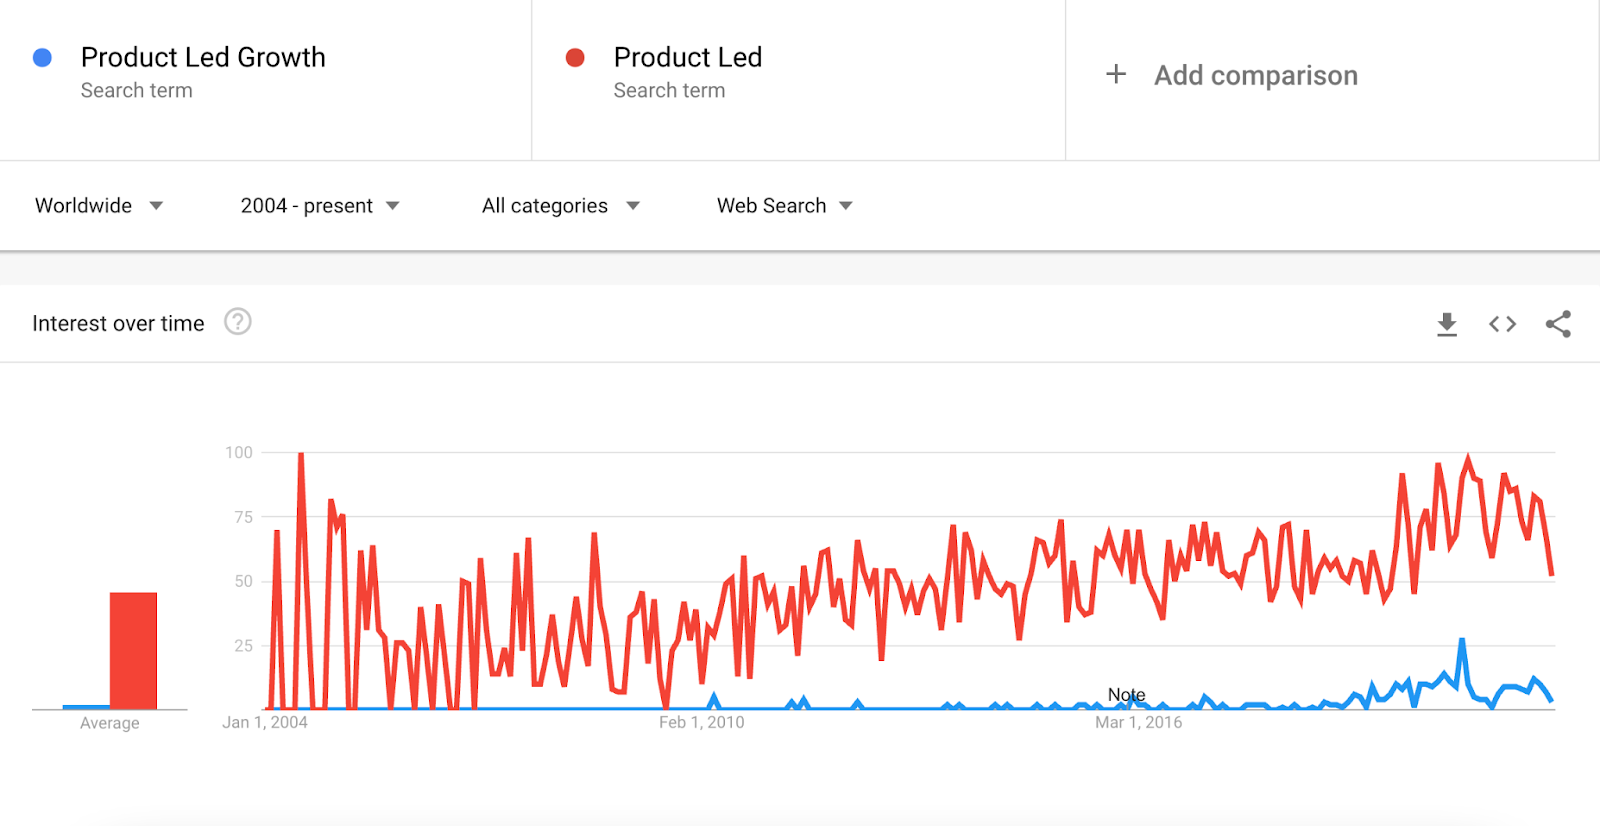 Google Search Volume for ‘Product Led Growth’ and ‘Product Led’